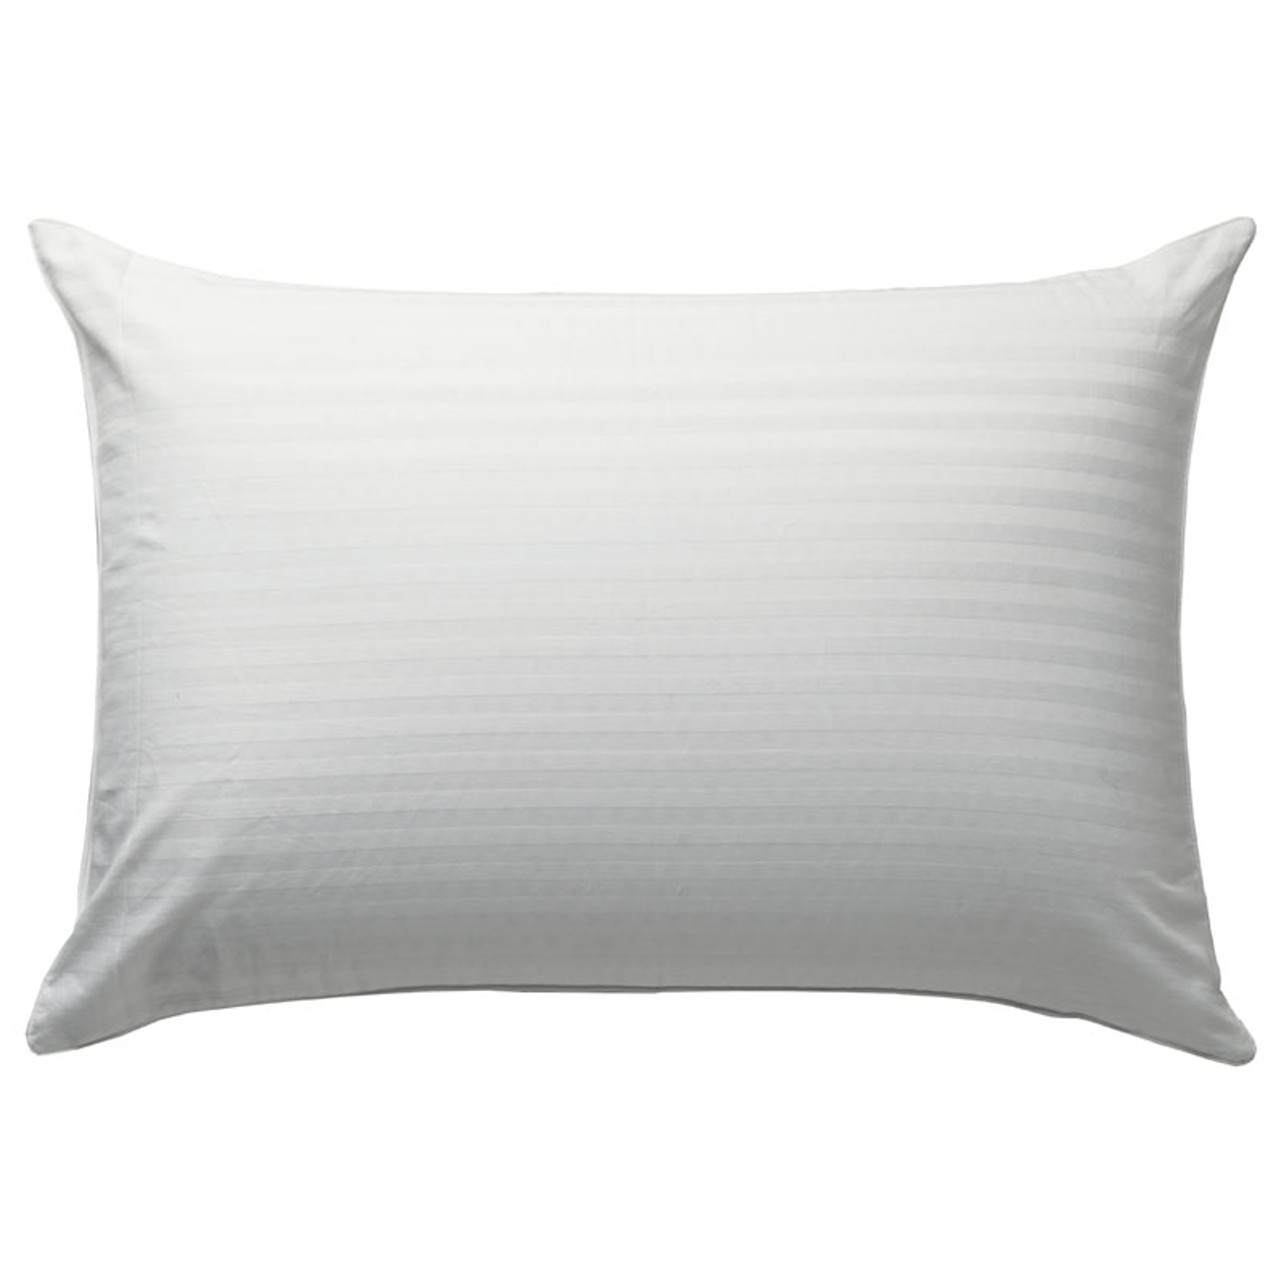 Deluxe Natural Latex Pincore Pillow by Logan & Mason | My Linen